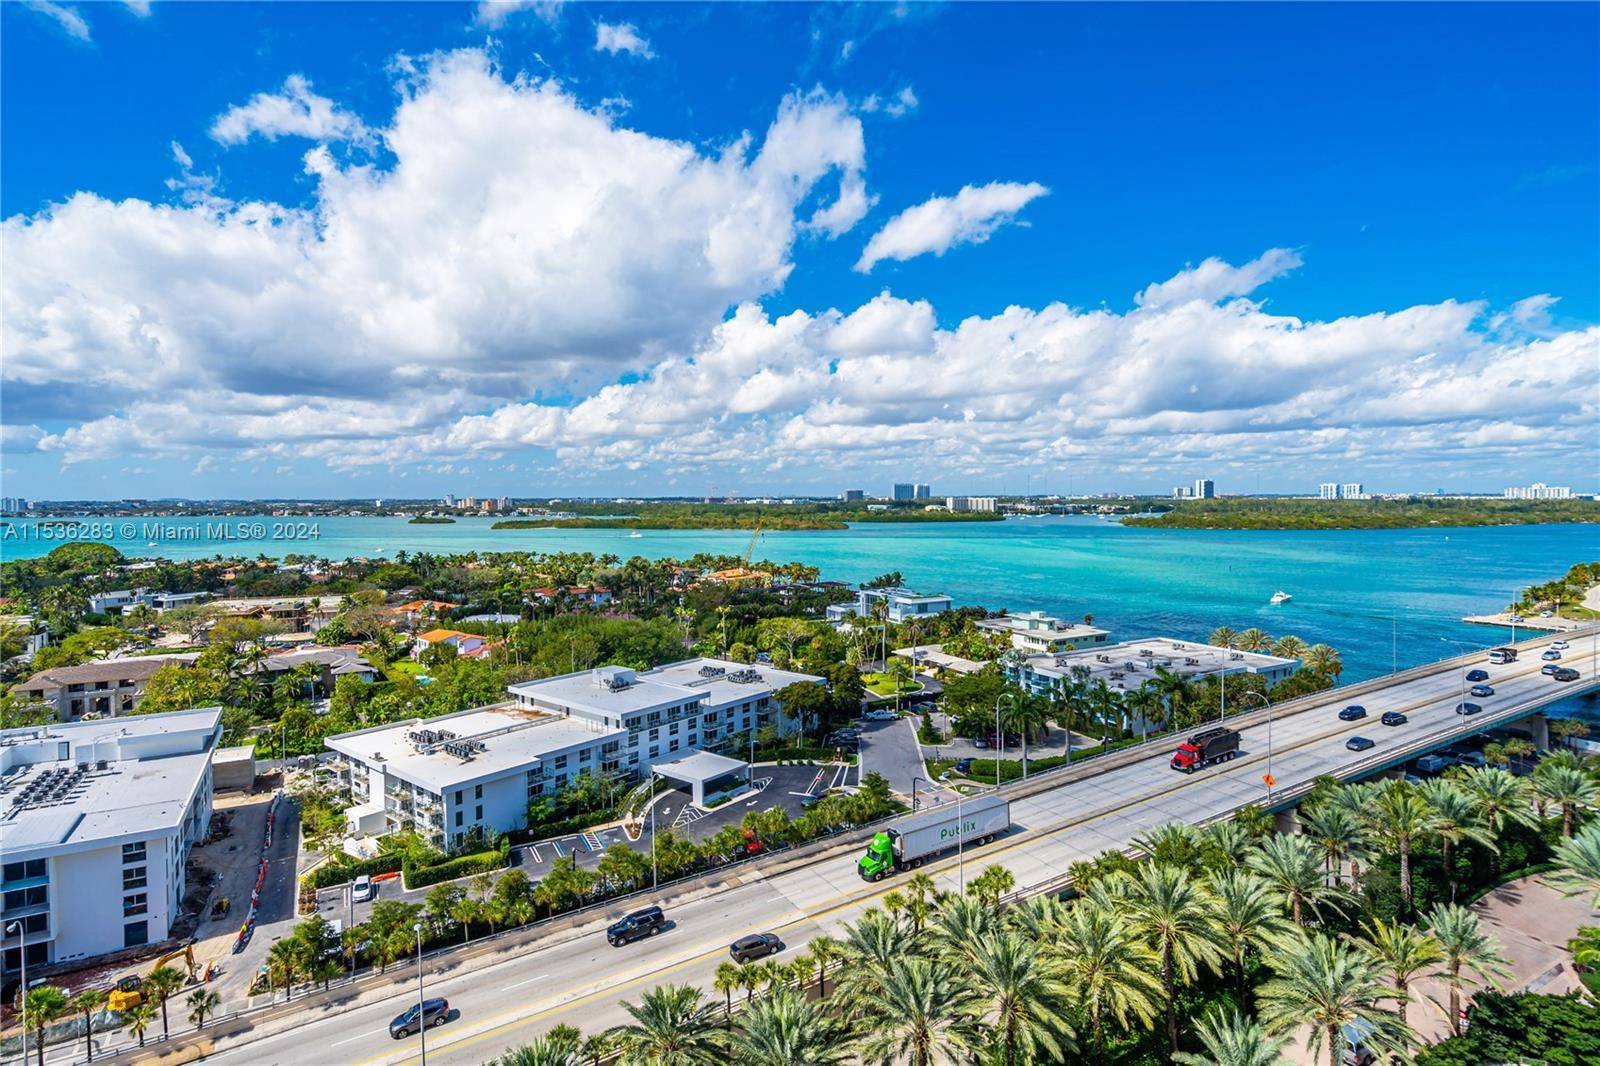 Enjoy stunning views of the intracoastal waterway and breathtaking sunsets from this lovely residence.